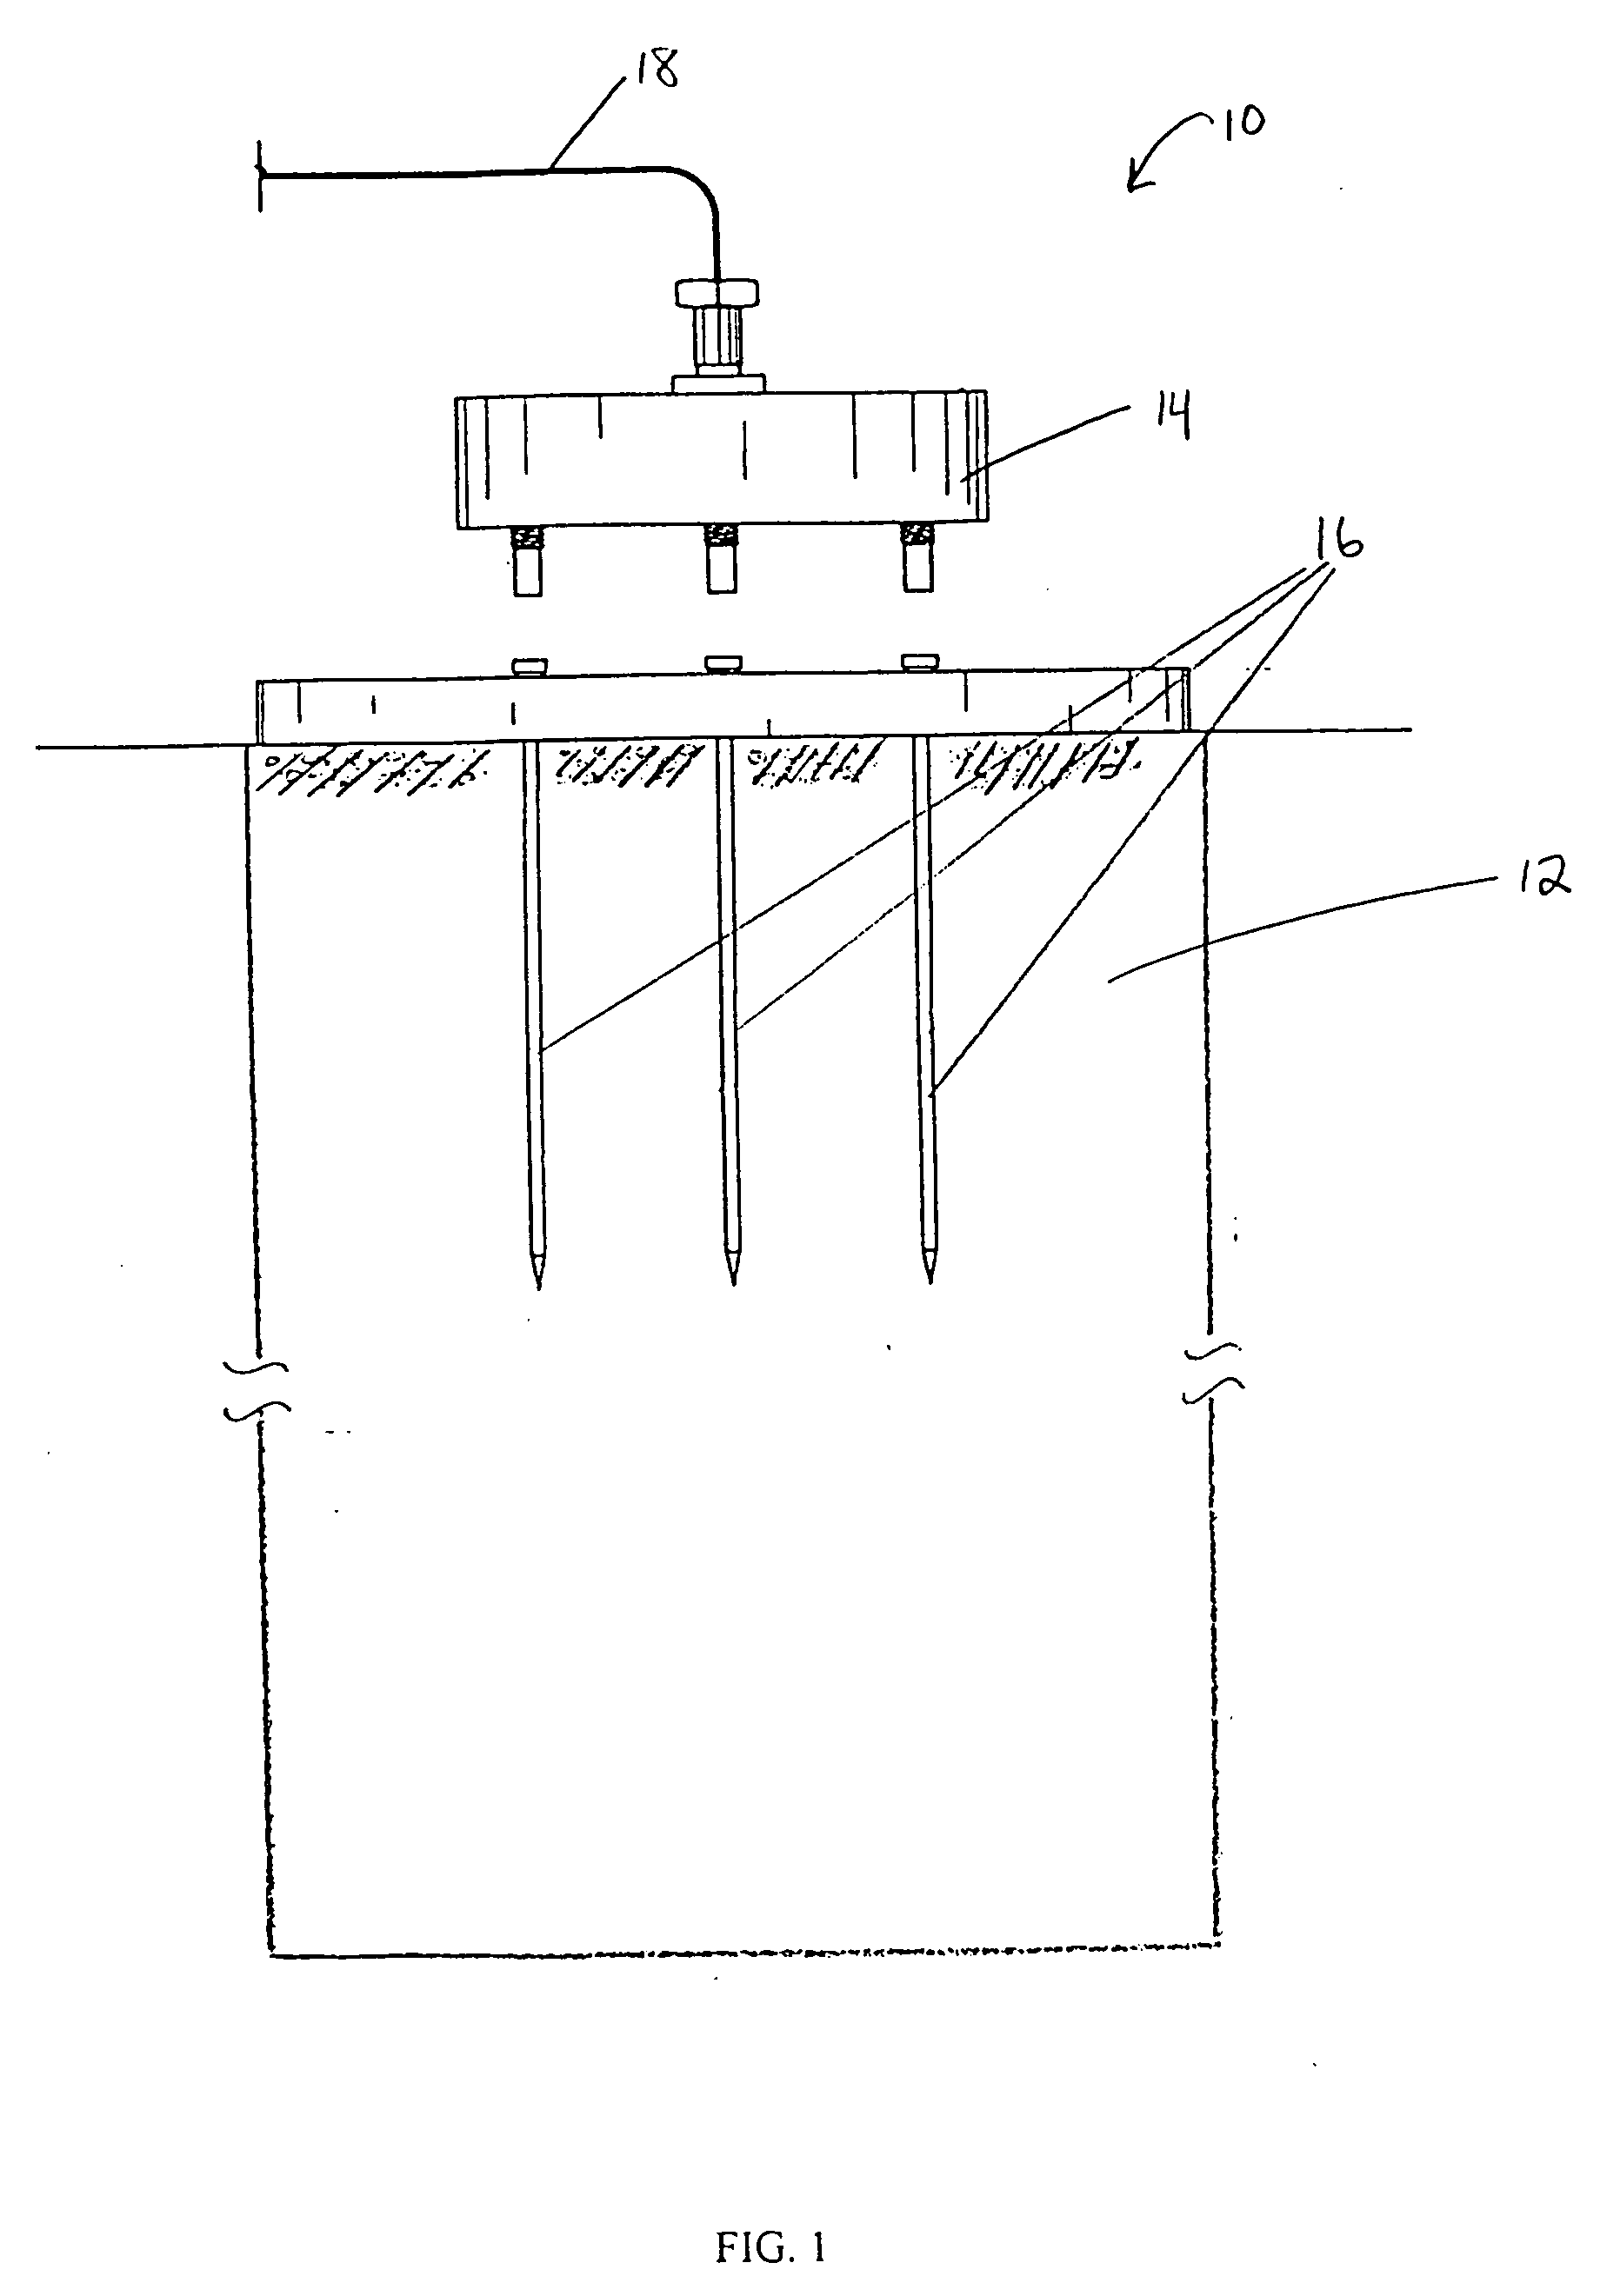 Method and apparatus for measuring properties of concrete